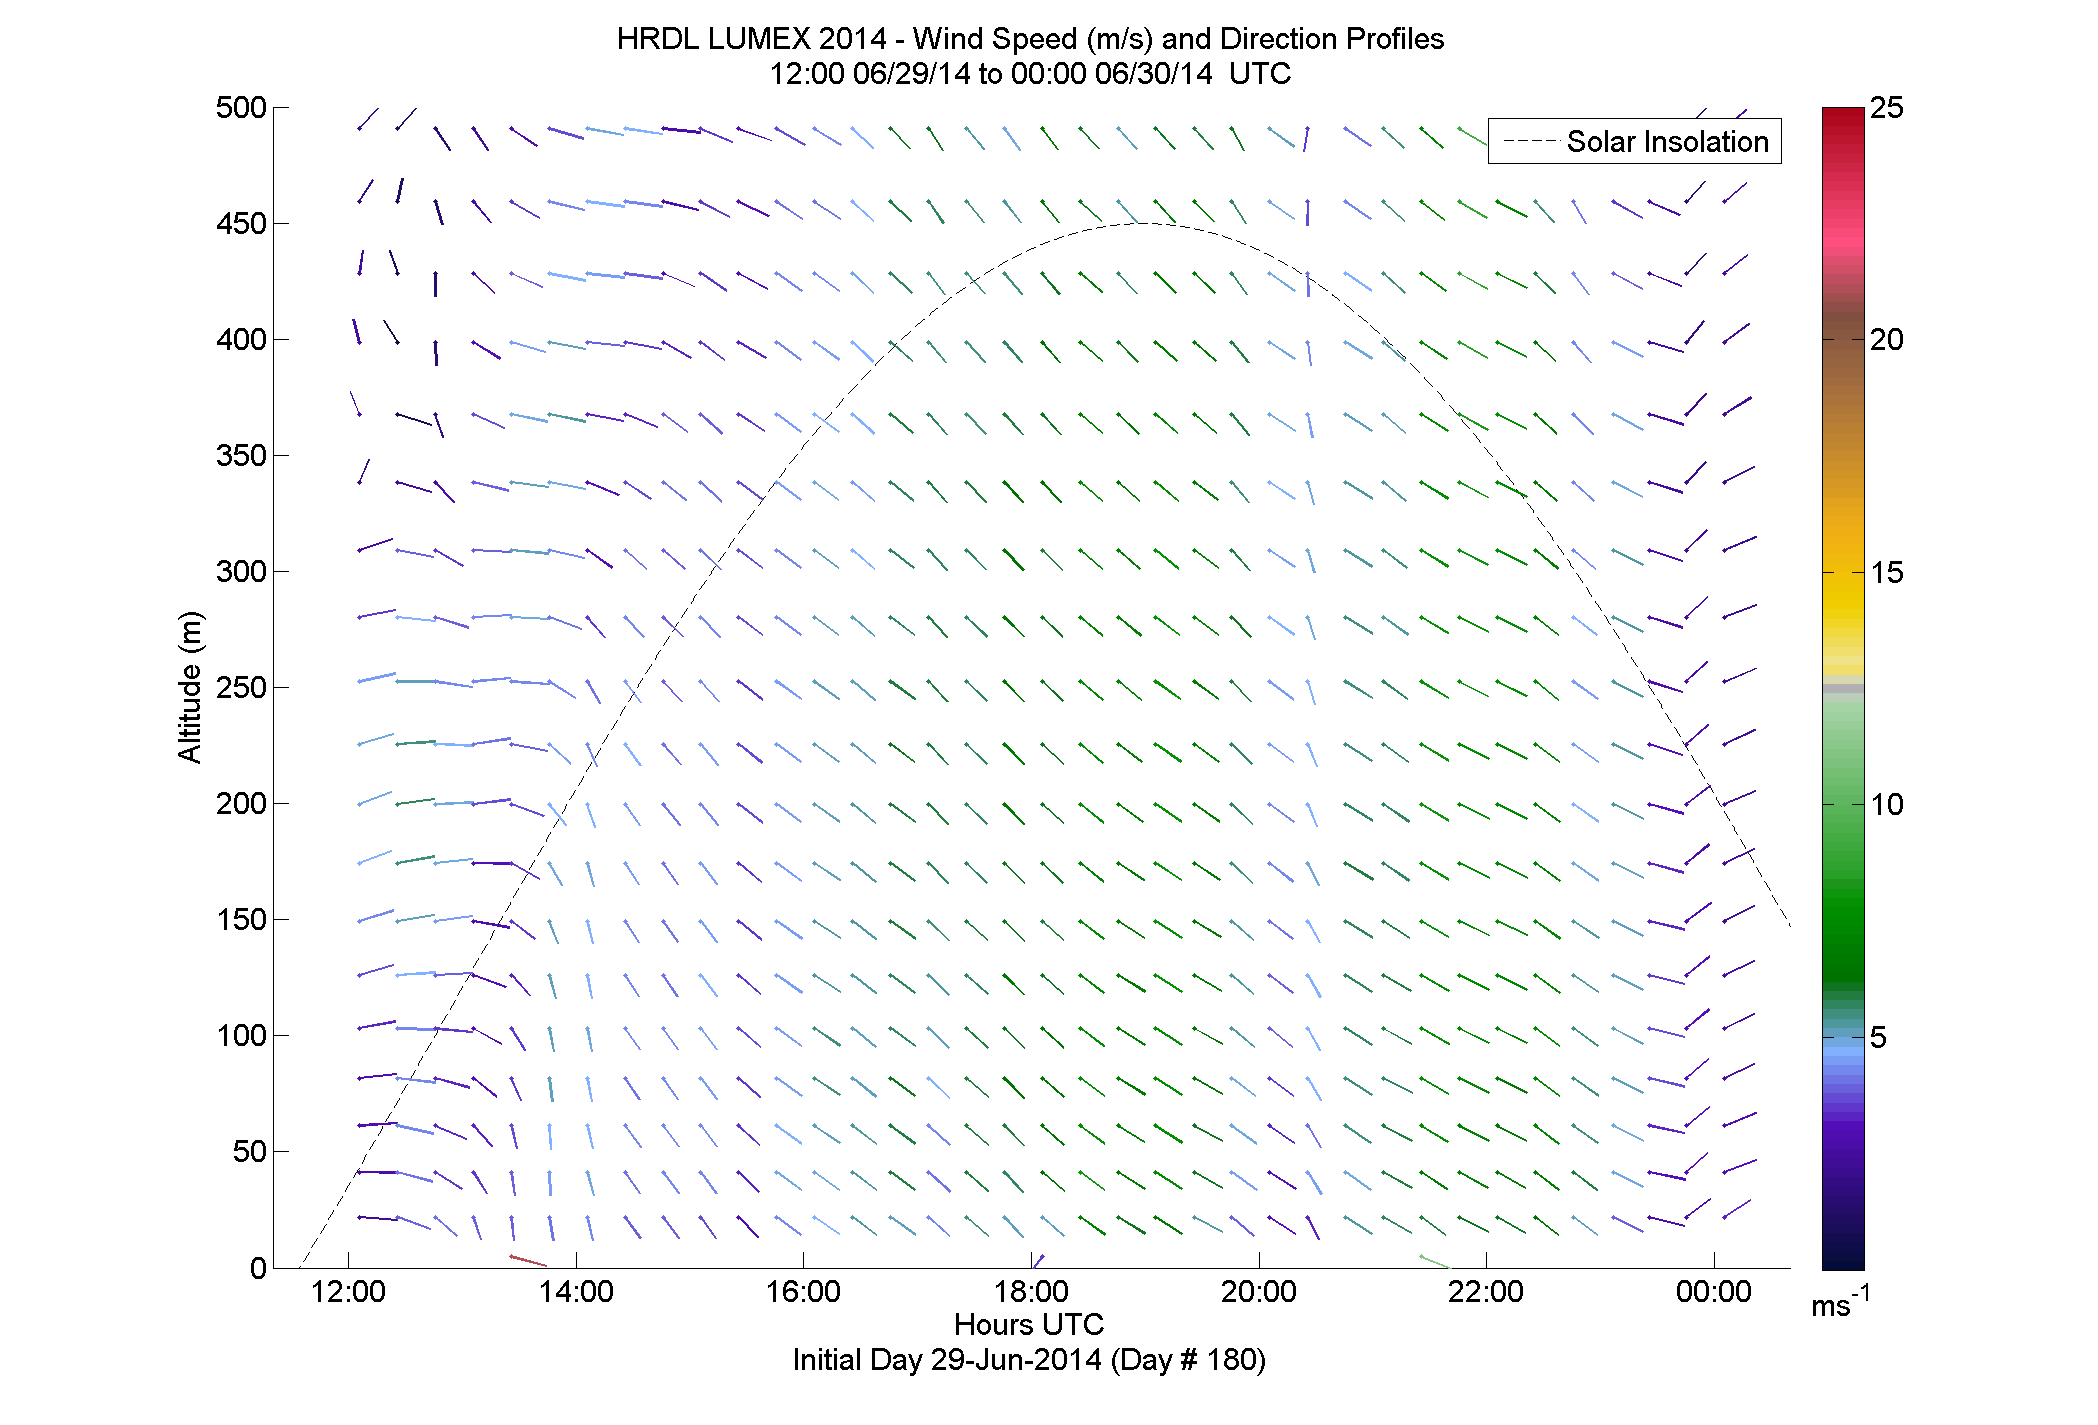 HRDL speed and direction profile - June 29 pm